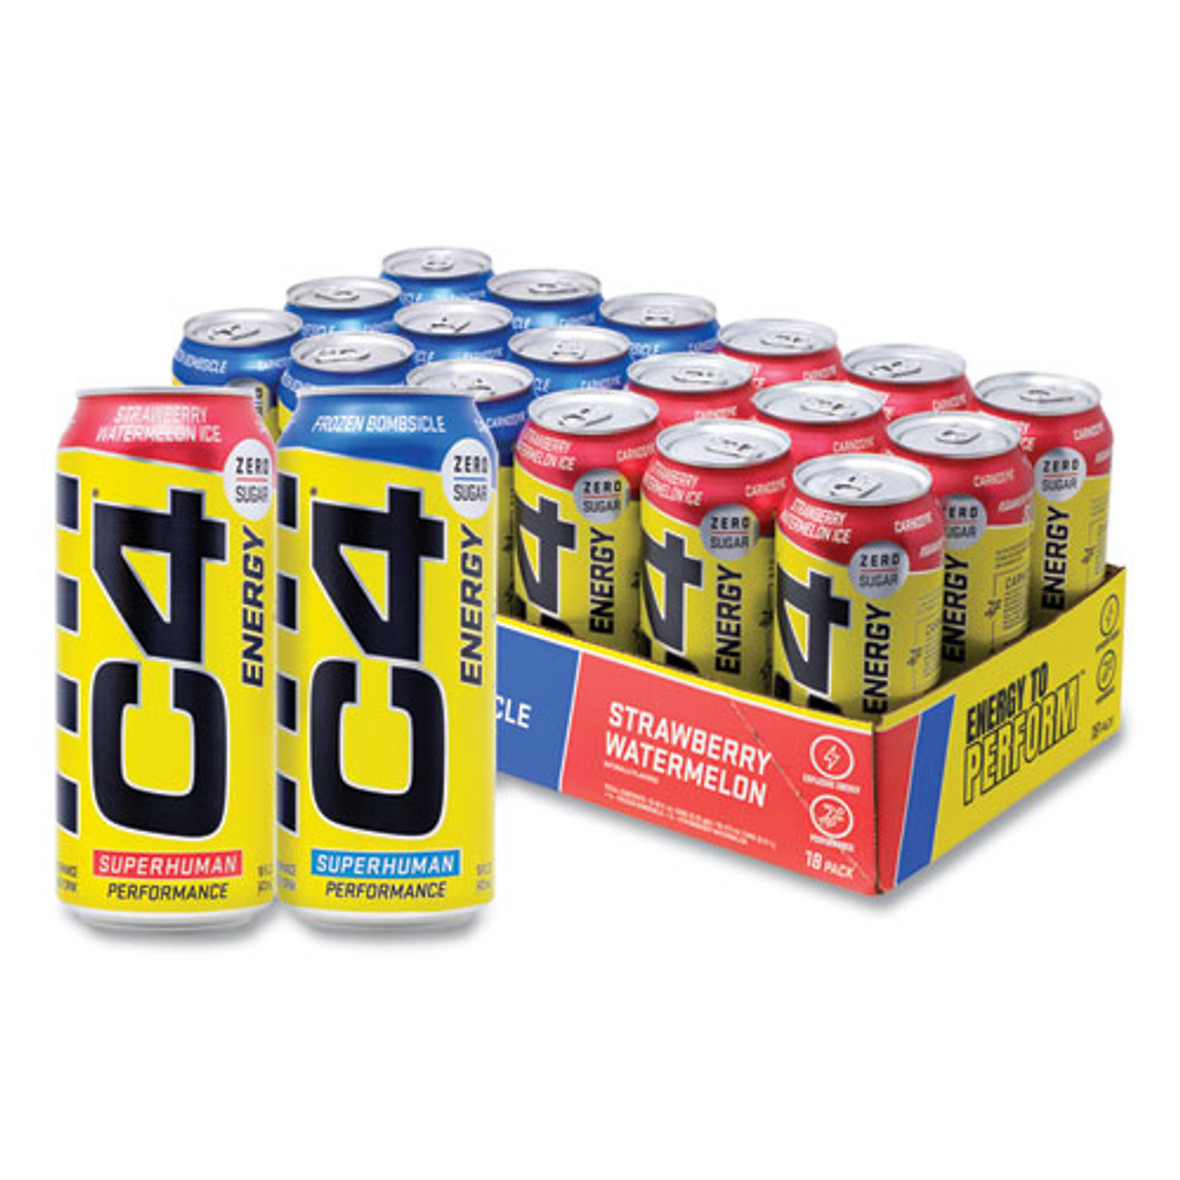 C4 Energy Drink Variety Pack, Assorted Flavors, 16 Oz Can, 18/carton